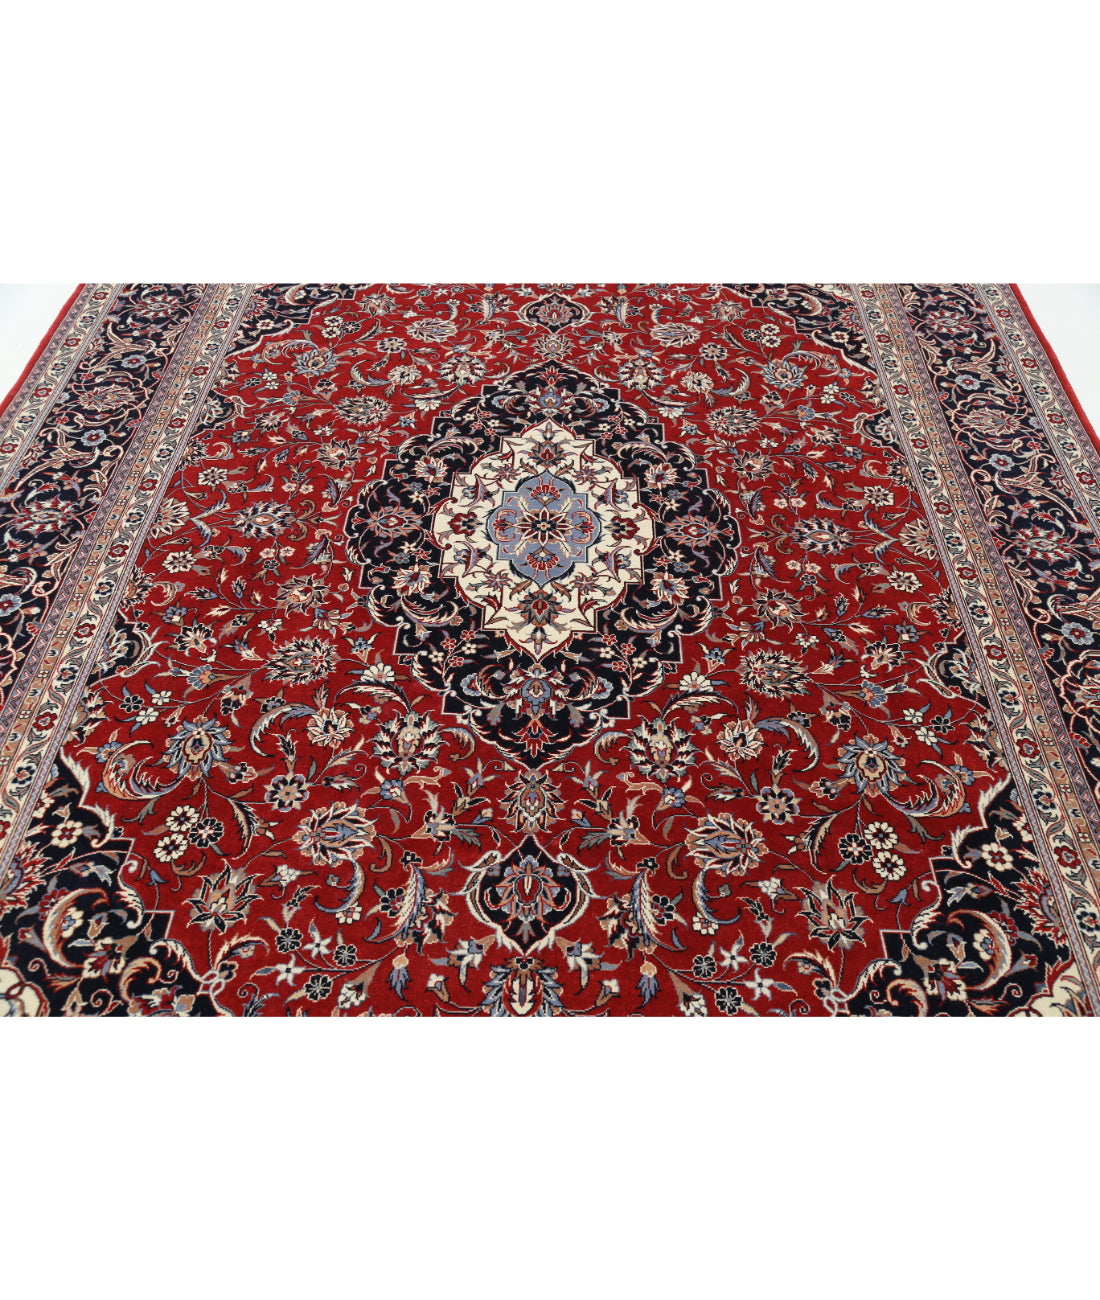 Heritage 7' 10" X 11' 3" Hand-Knotted Wool Rug 7' 10" X 11' 3" (239 X 343) / Red / Blue